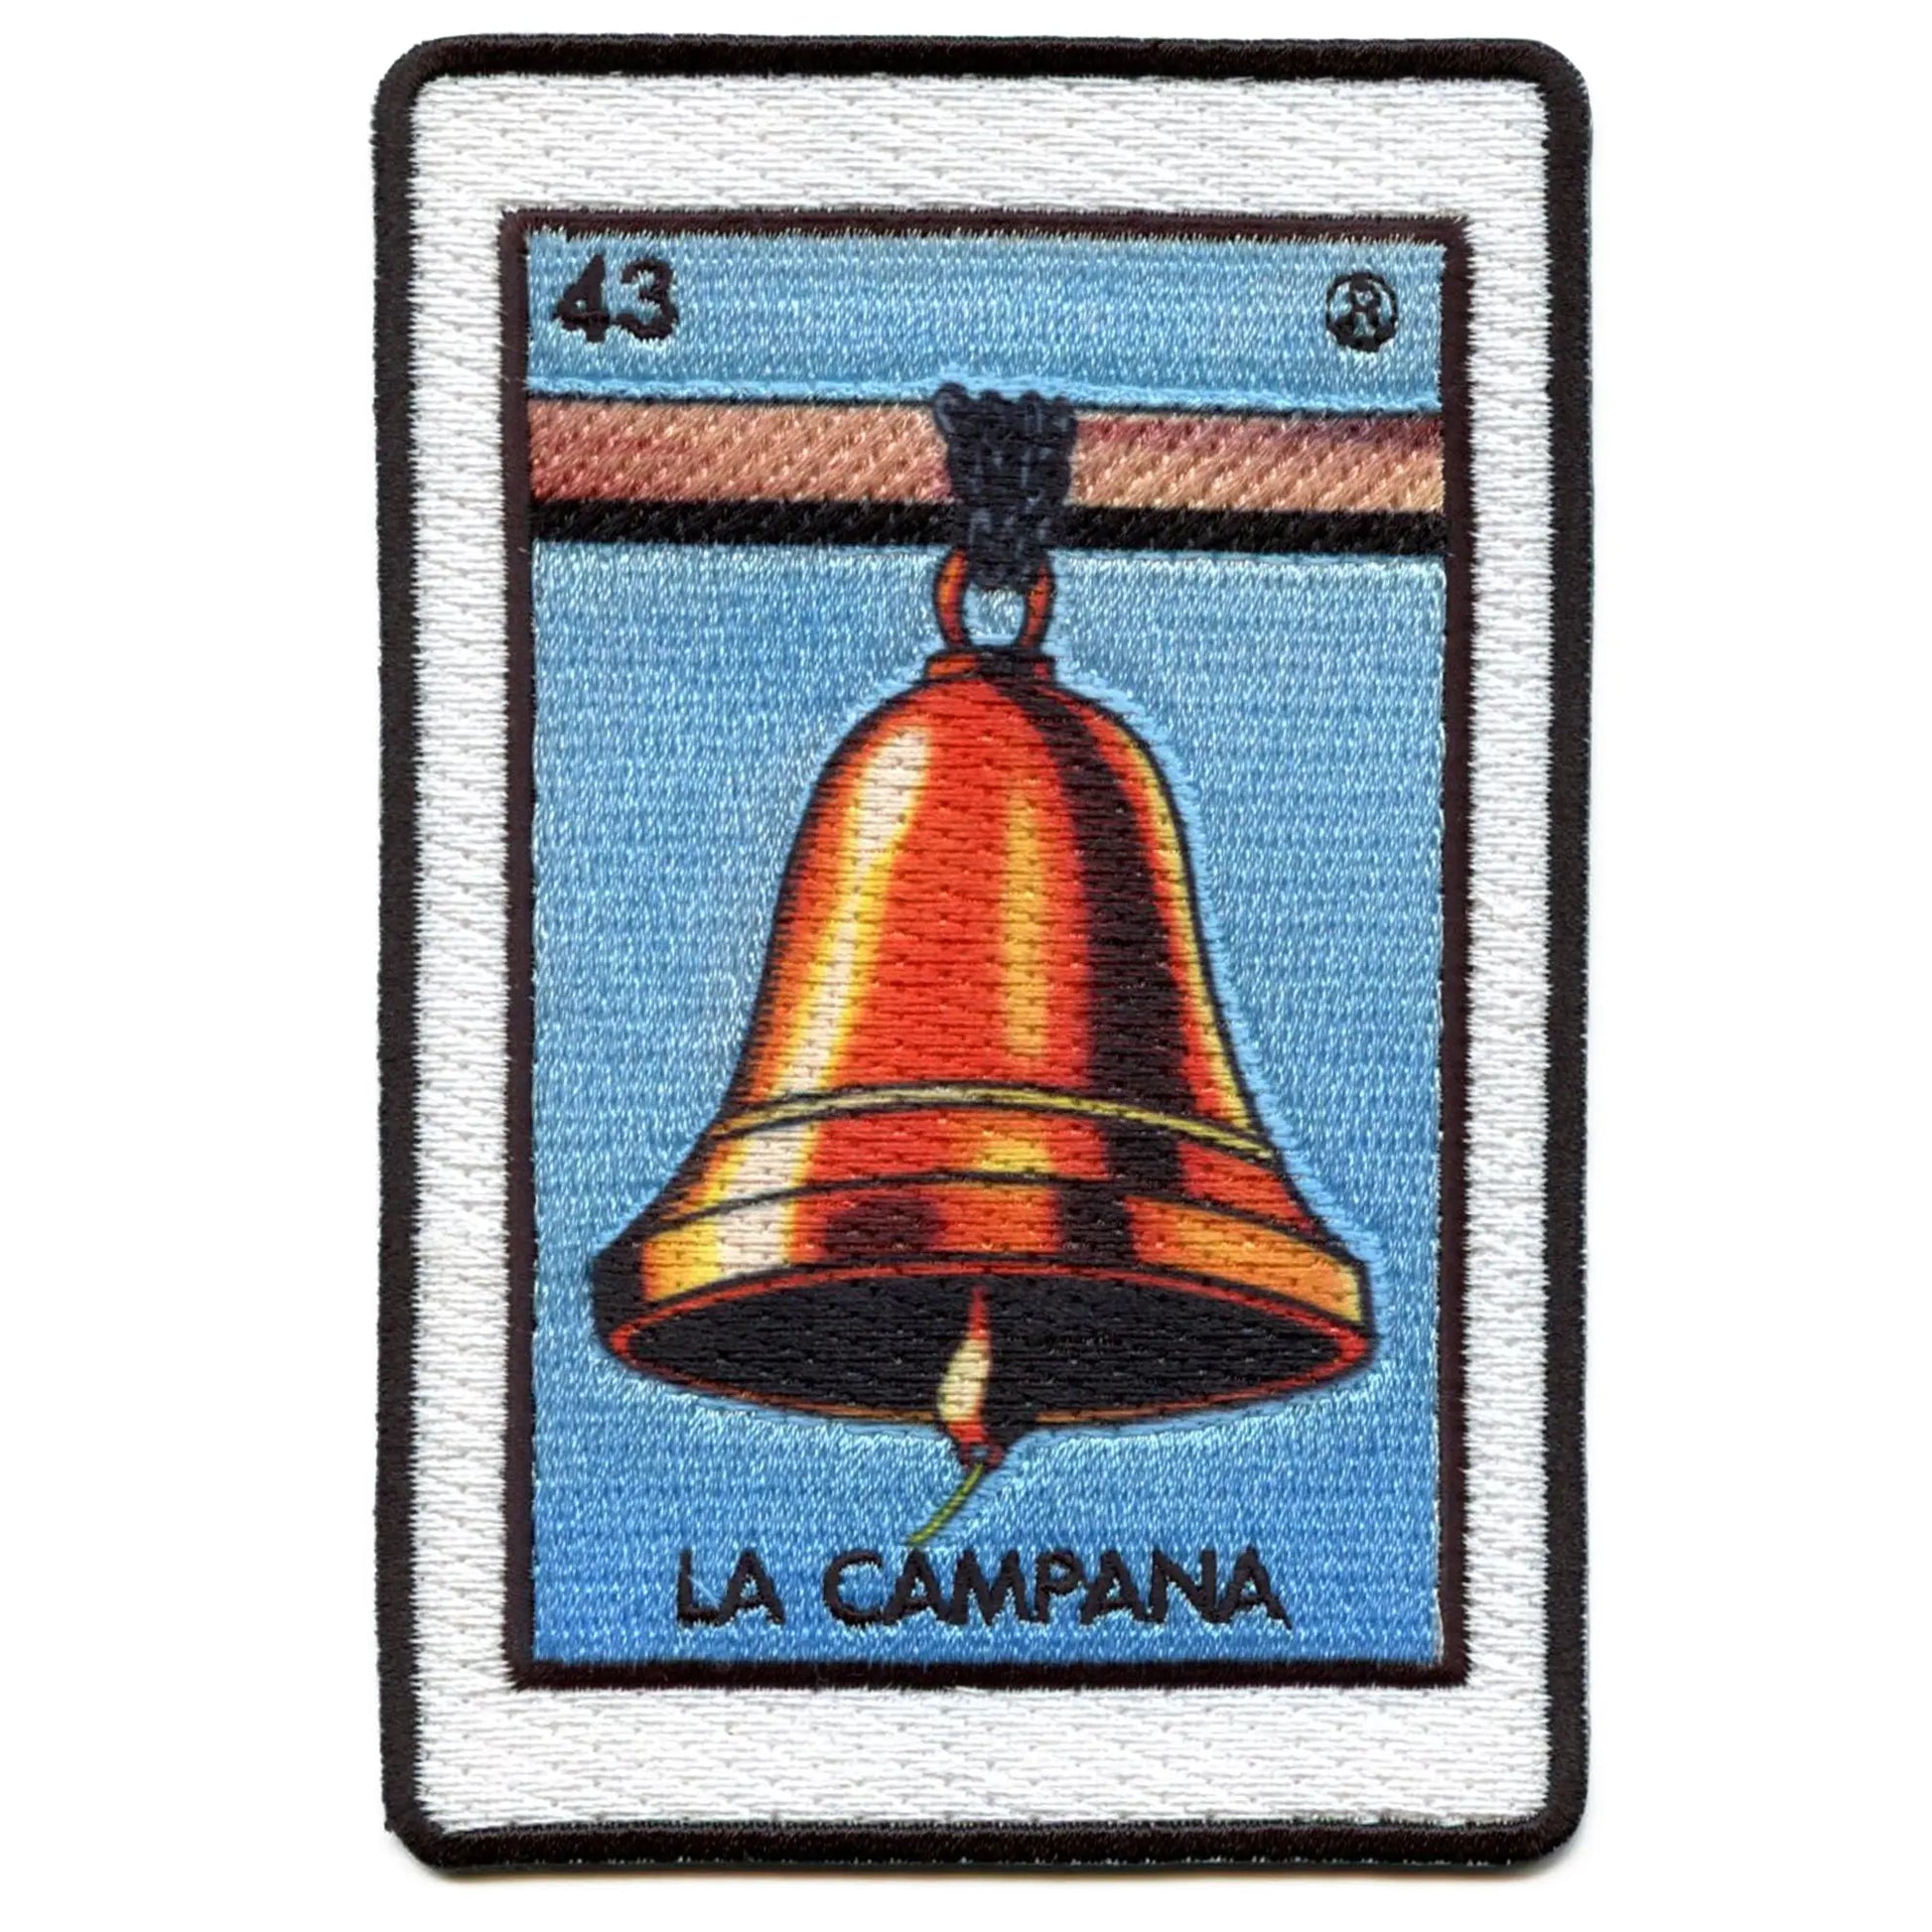 La Campana 43 Patch Mexican Loteria Card Sublimated Embroidery Iron On